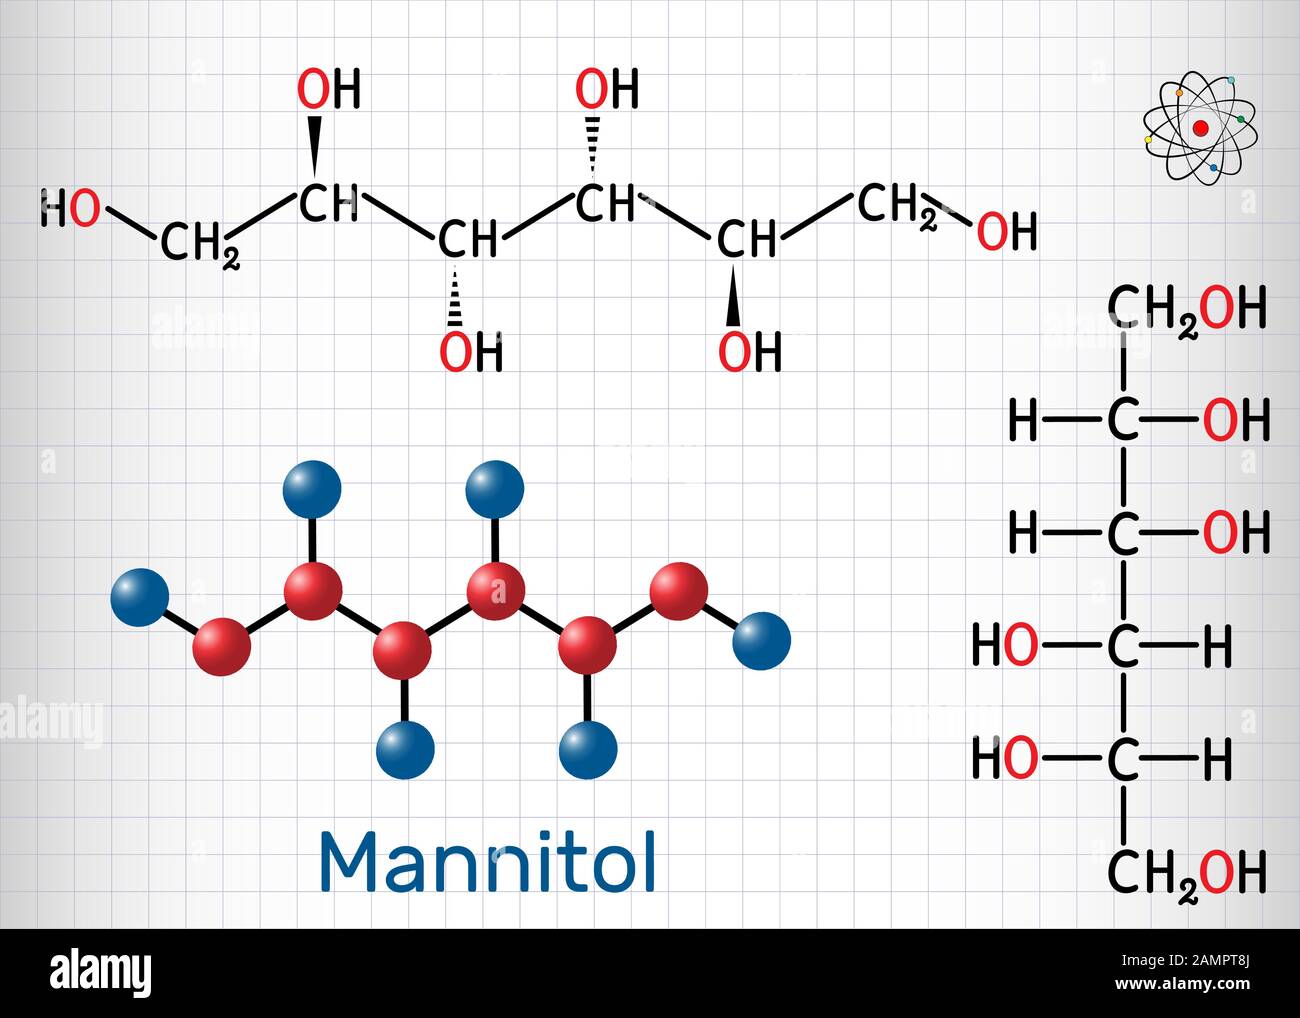 Mannitol, sugar alcohol, a sorbitol isomer molecule. It is used as a sweetener and medication. Structural chemical formula and molecule model. Sheet o Stock Vector